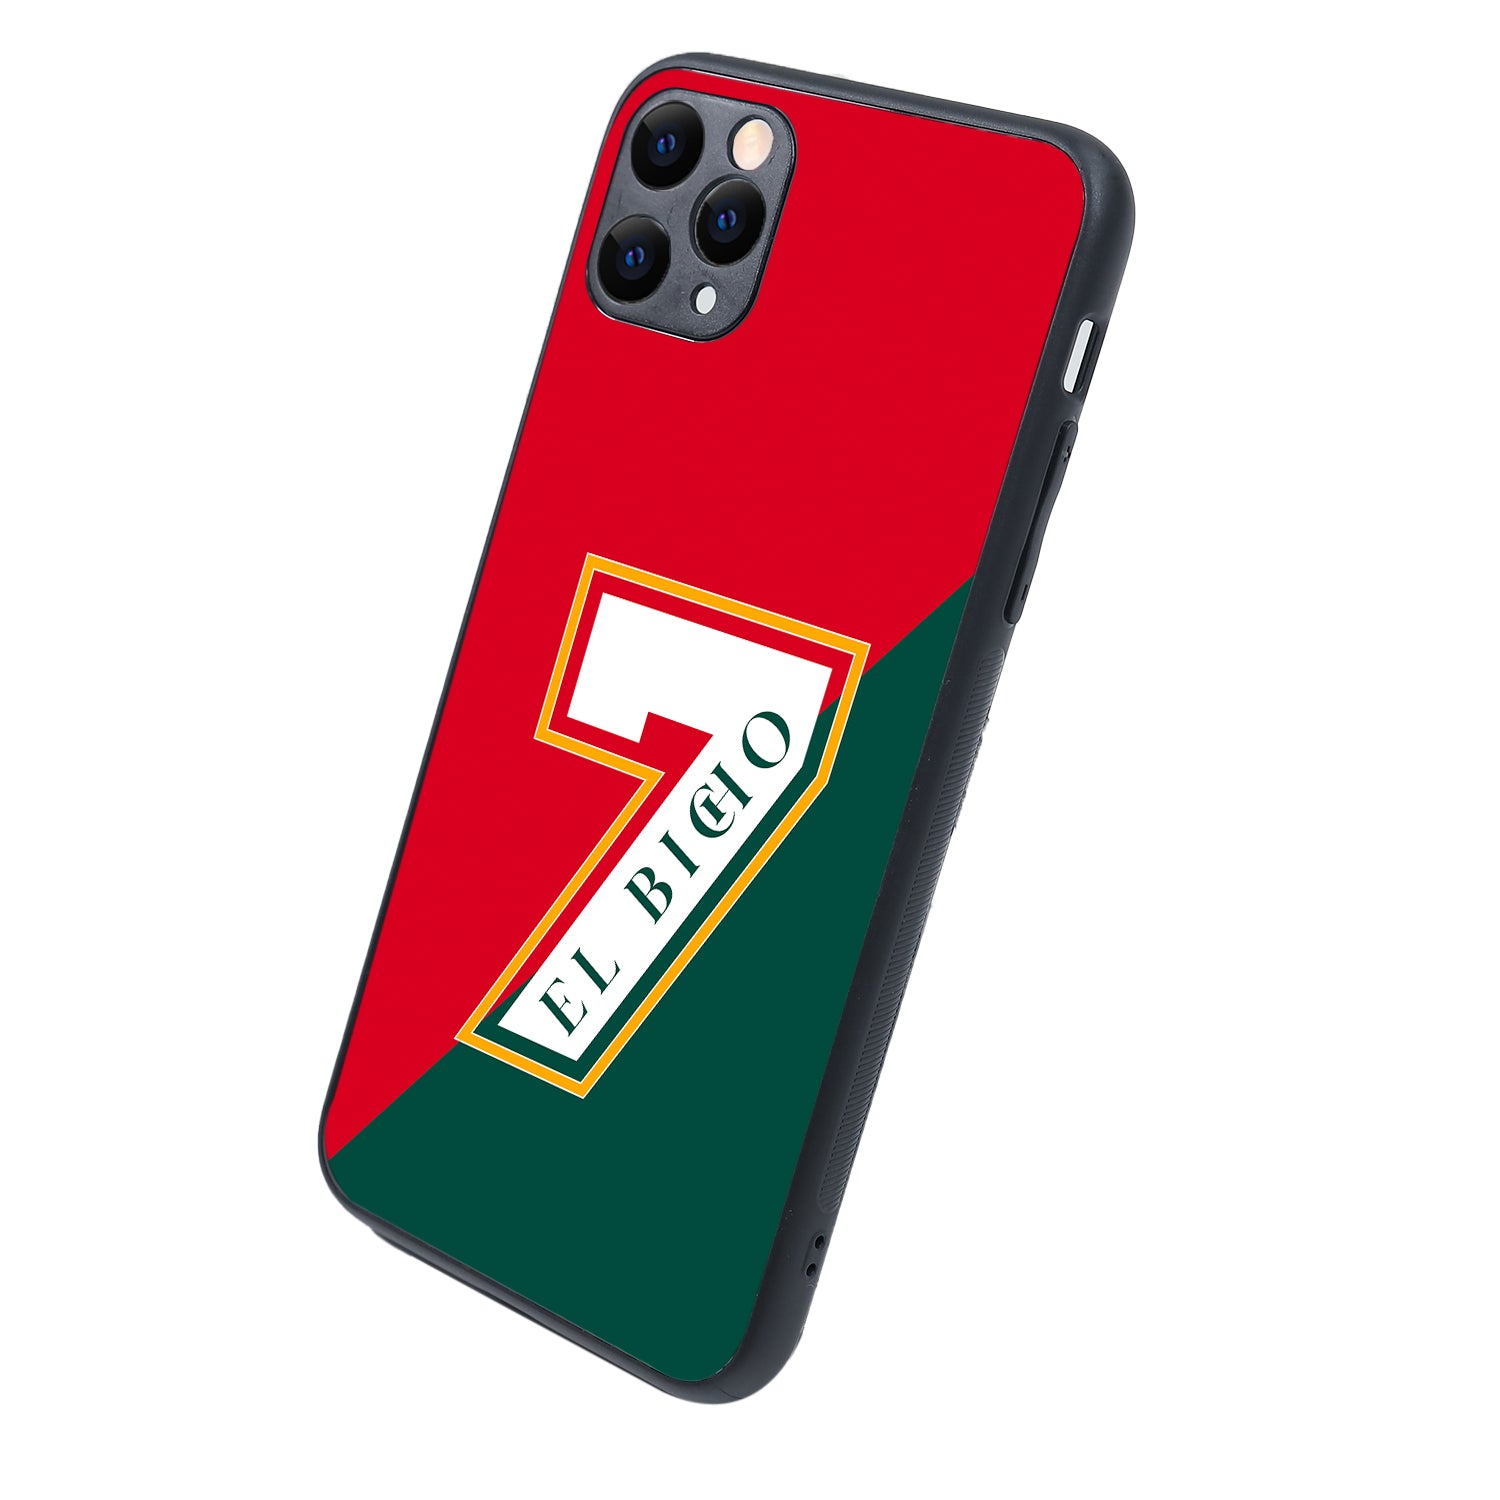 Jersey 7 Sports iPhone 11 Pro Max Case